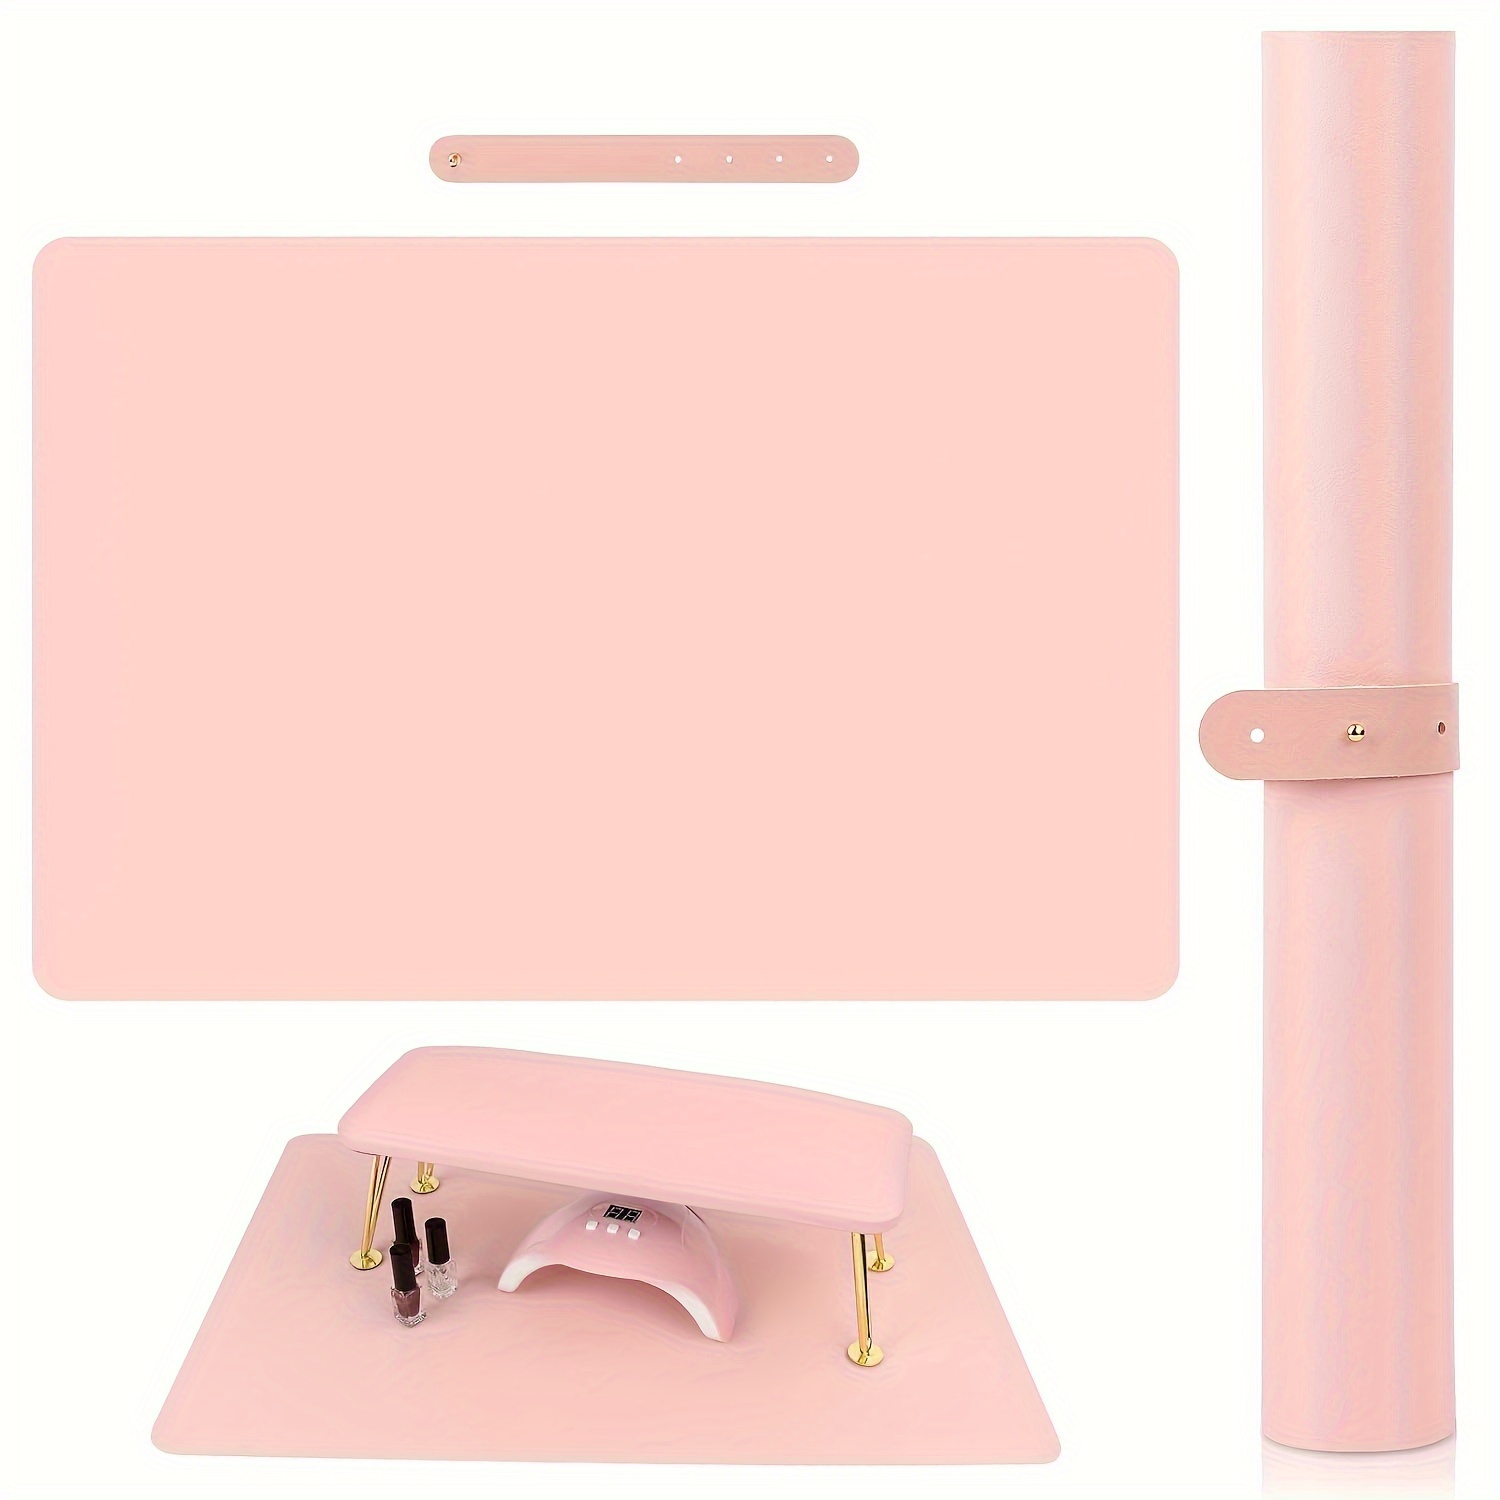 

Foldable Pink Nail Art Table Mat, Microfiber Pu Leather Nail Technician Manicure Pad, Heat & Scratch Resistant, Easy To Clean, Waterproof Desk Mat With Nail Hand Rest Cushion For Nail Art Studio